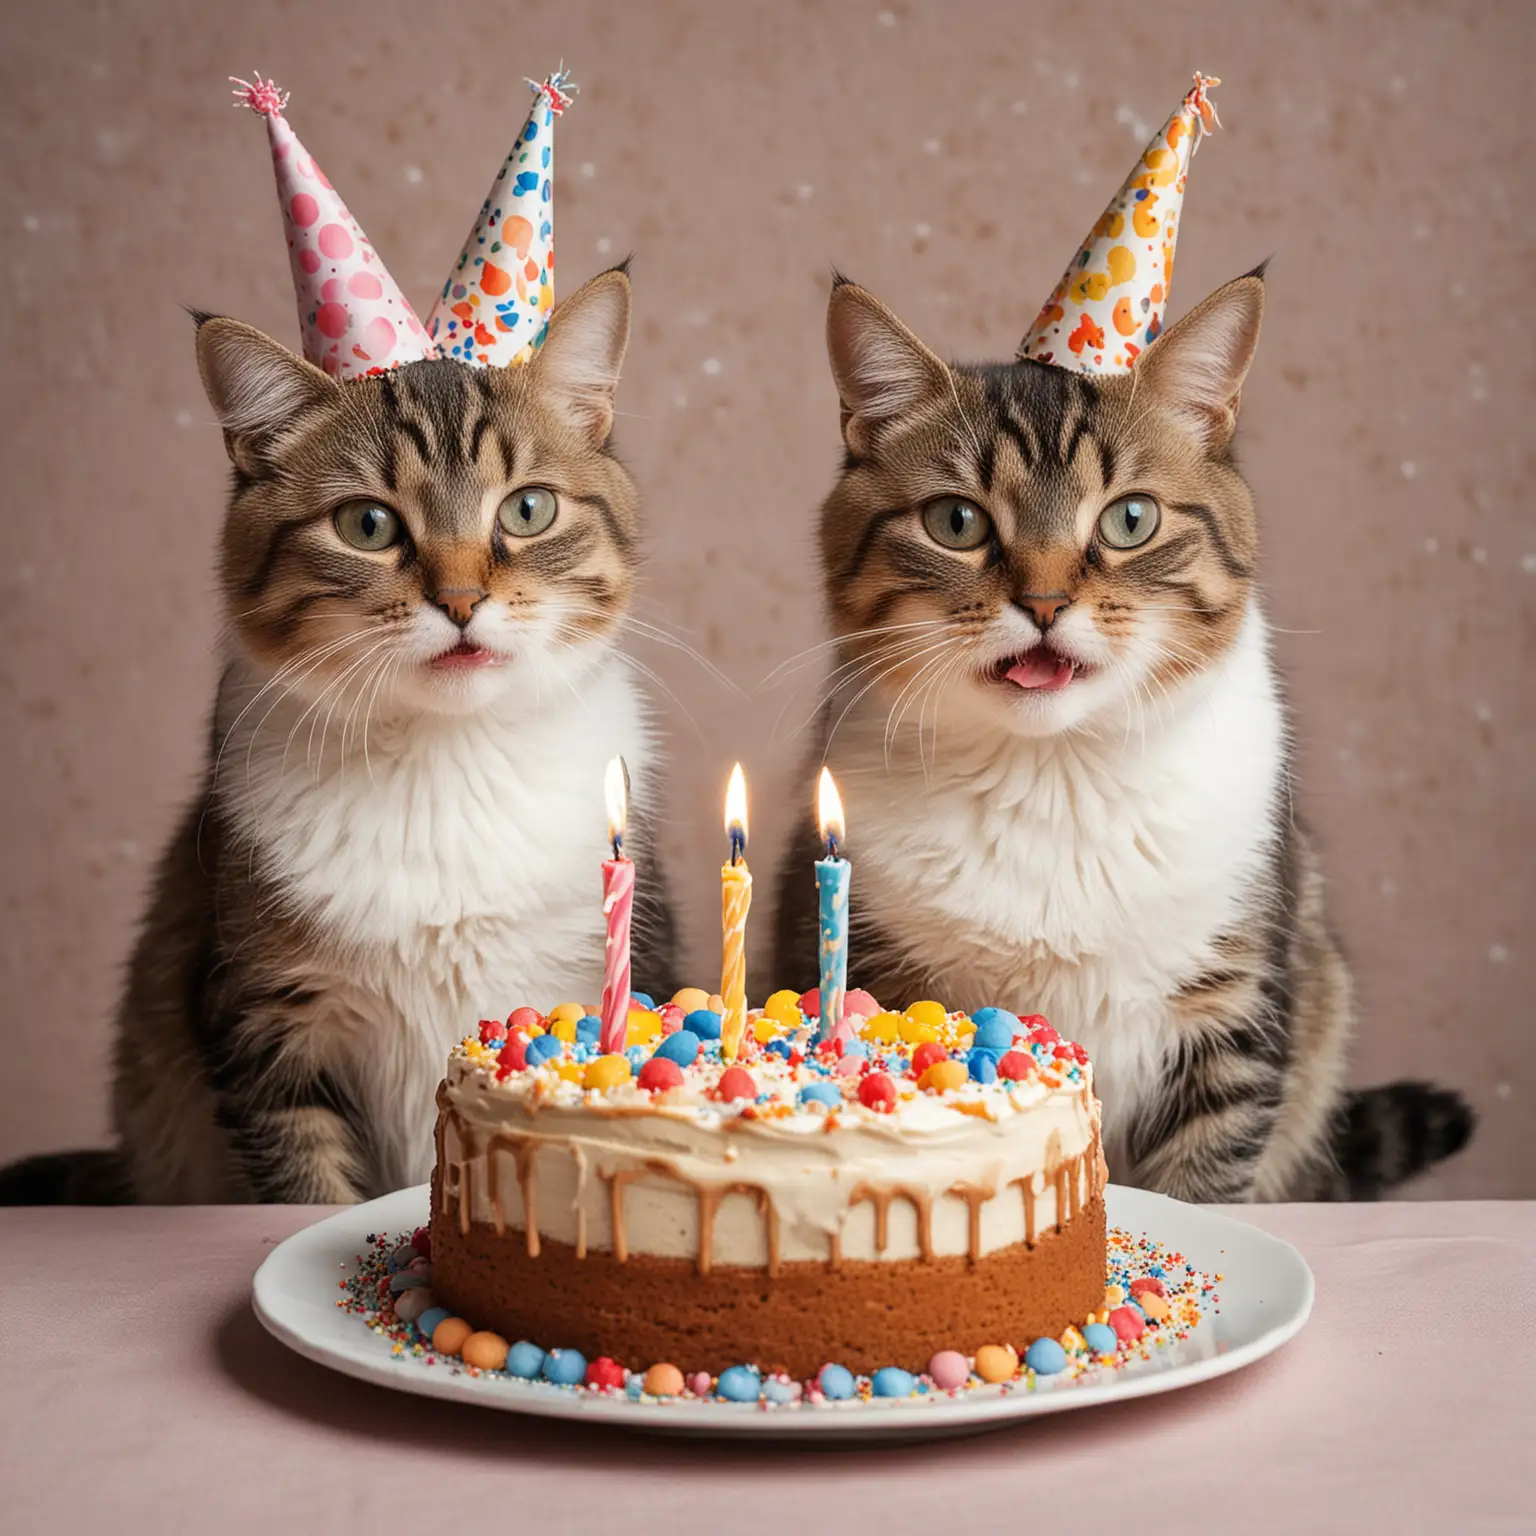 Two Cats Celebrating with a Birthday Cake